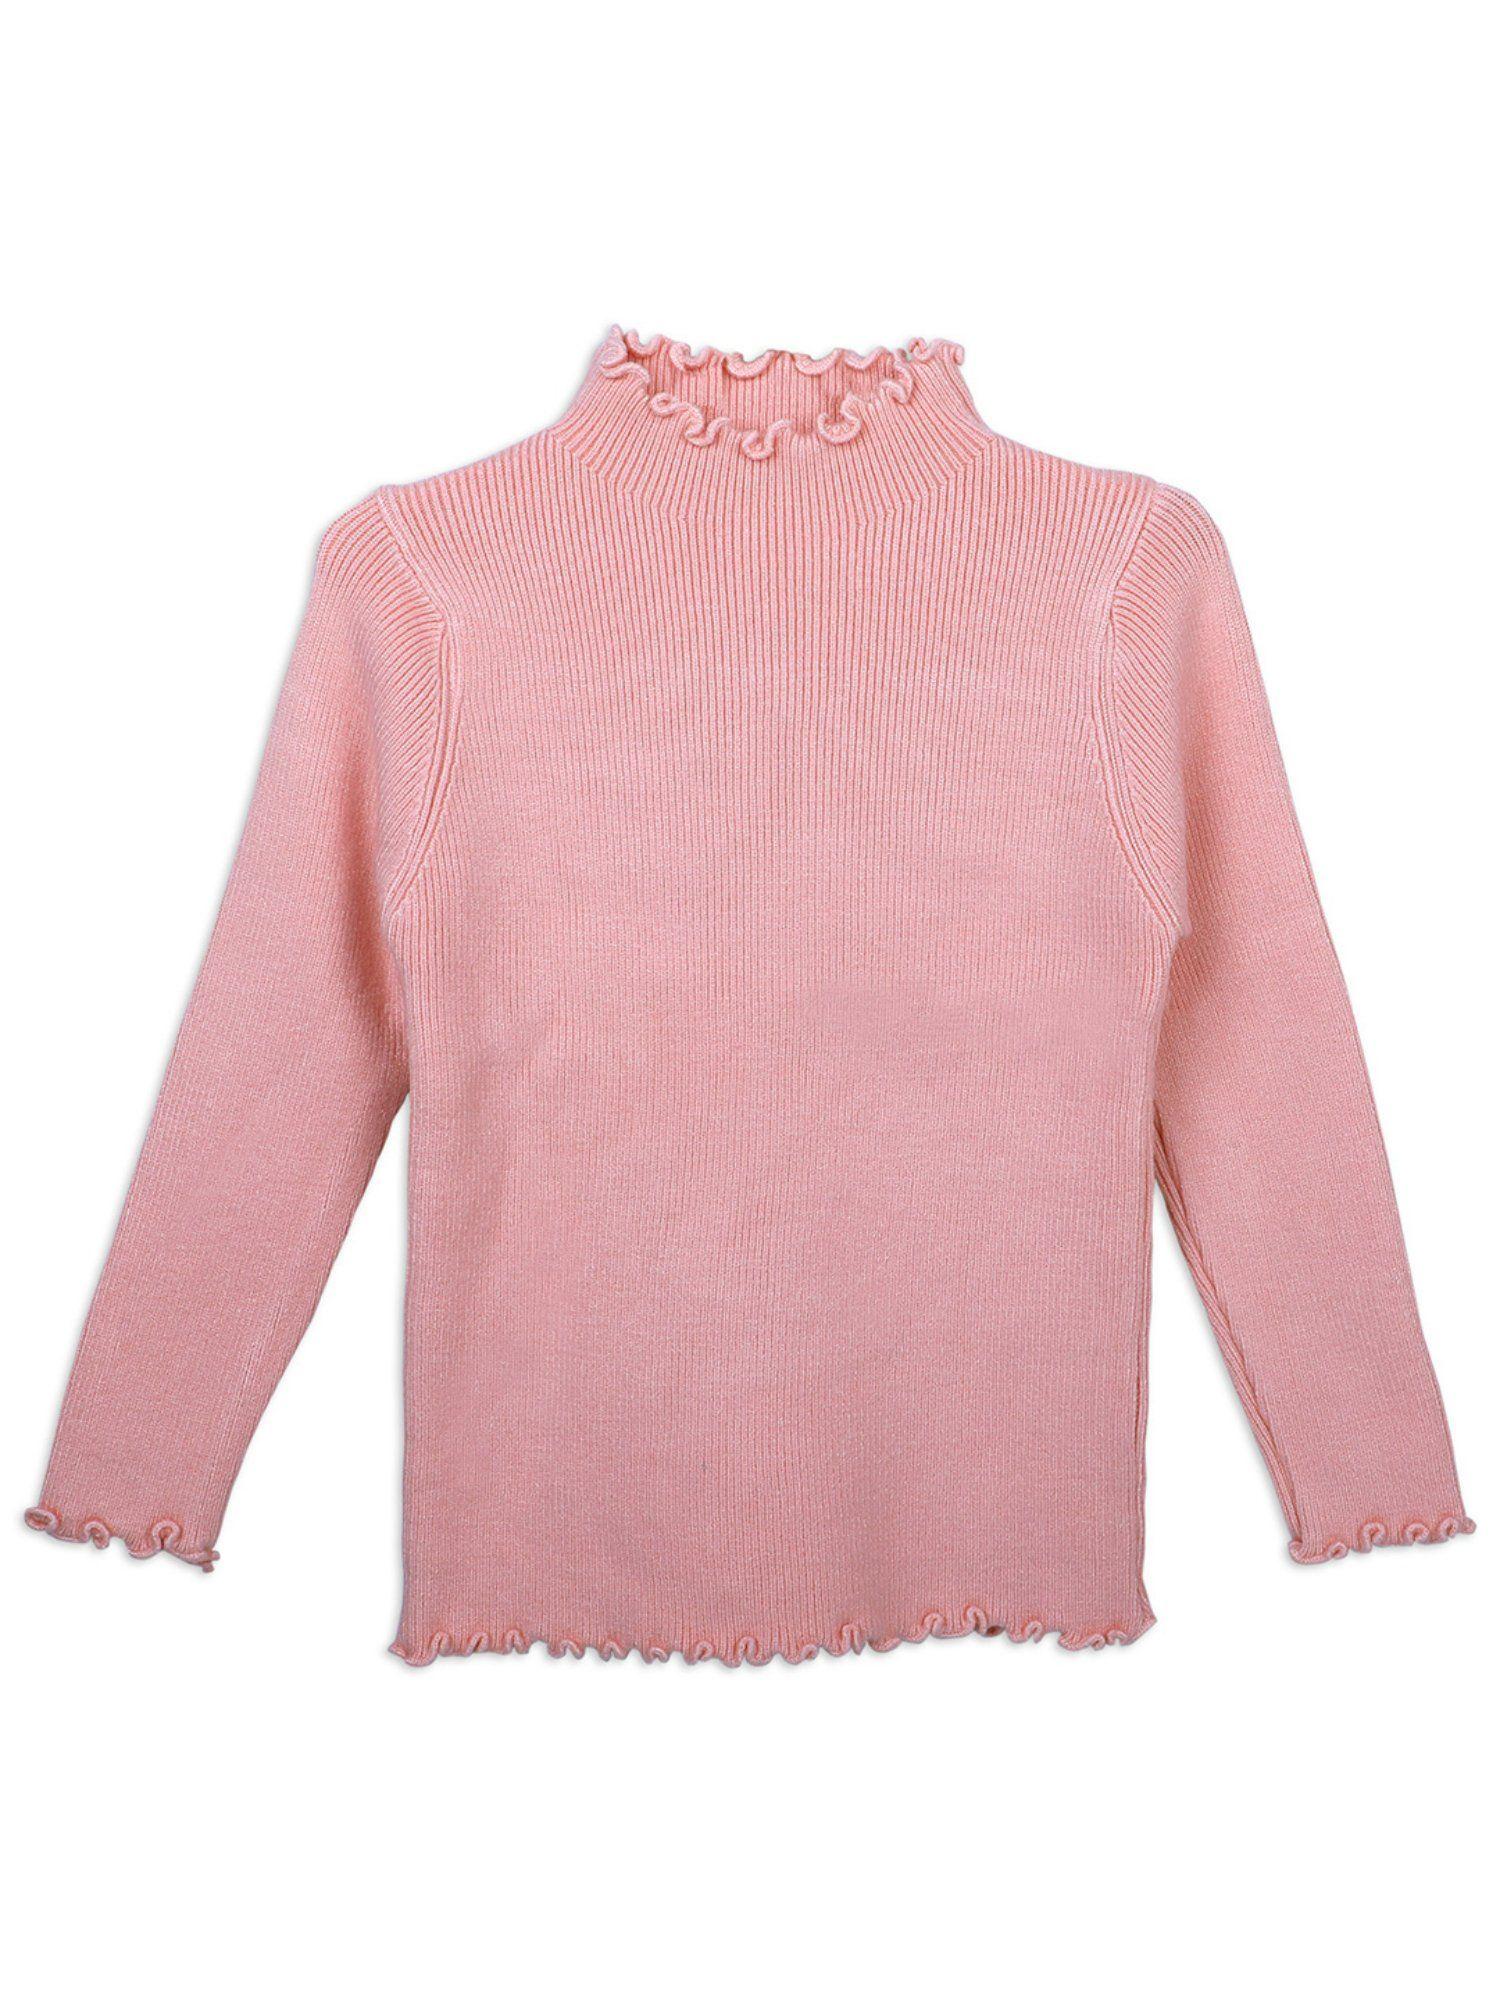 Basic Ribbed Premium Full Sleeves Knitted Kids Sweater Pink